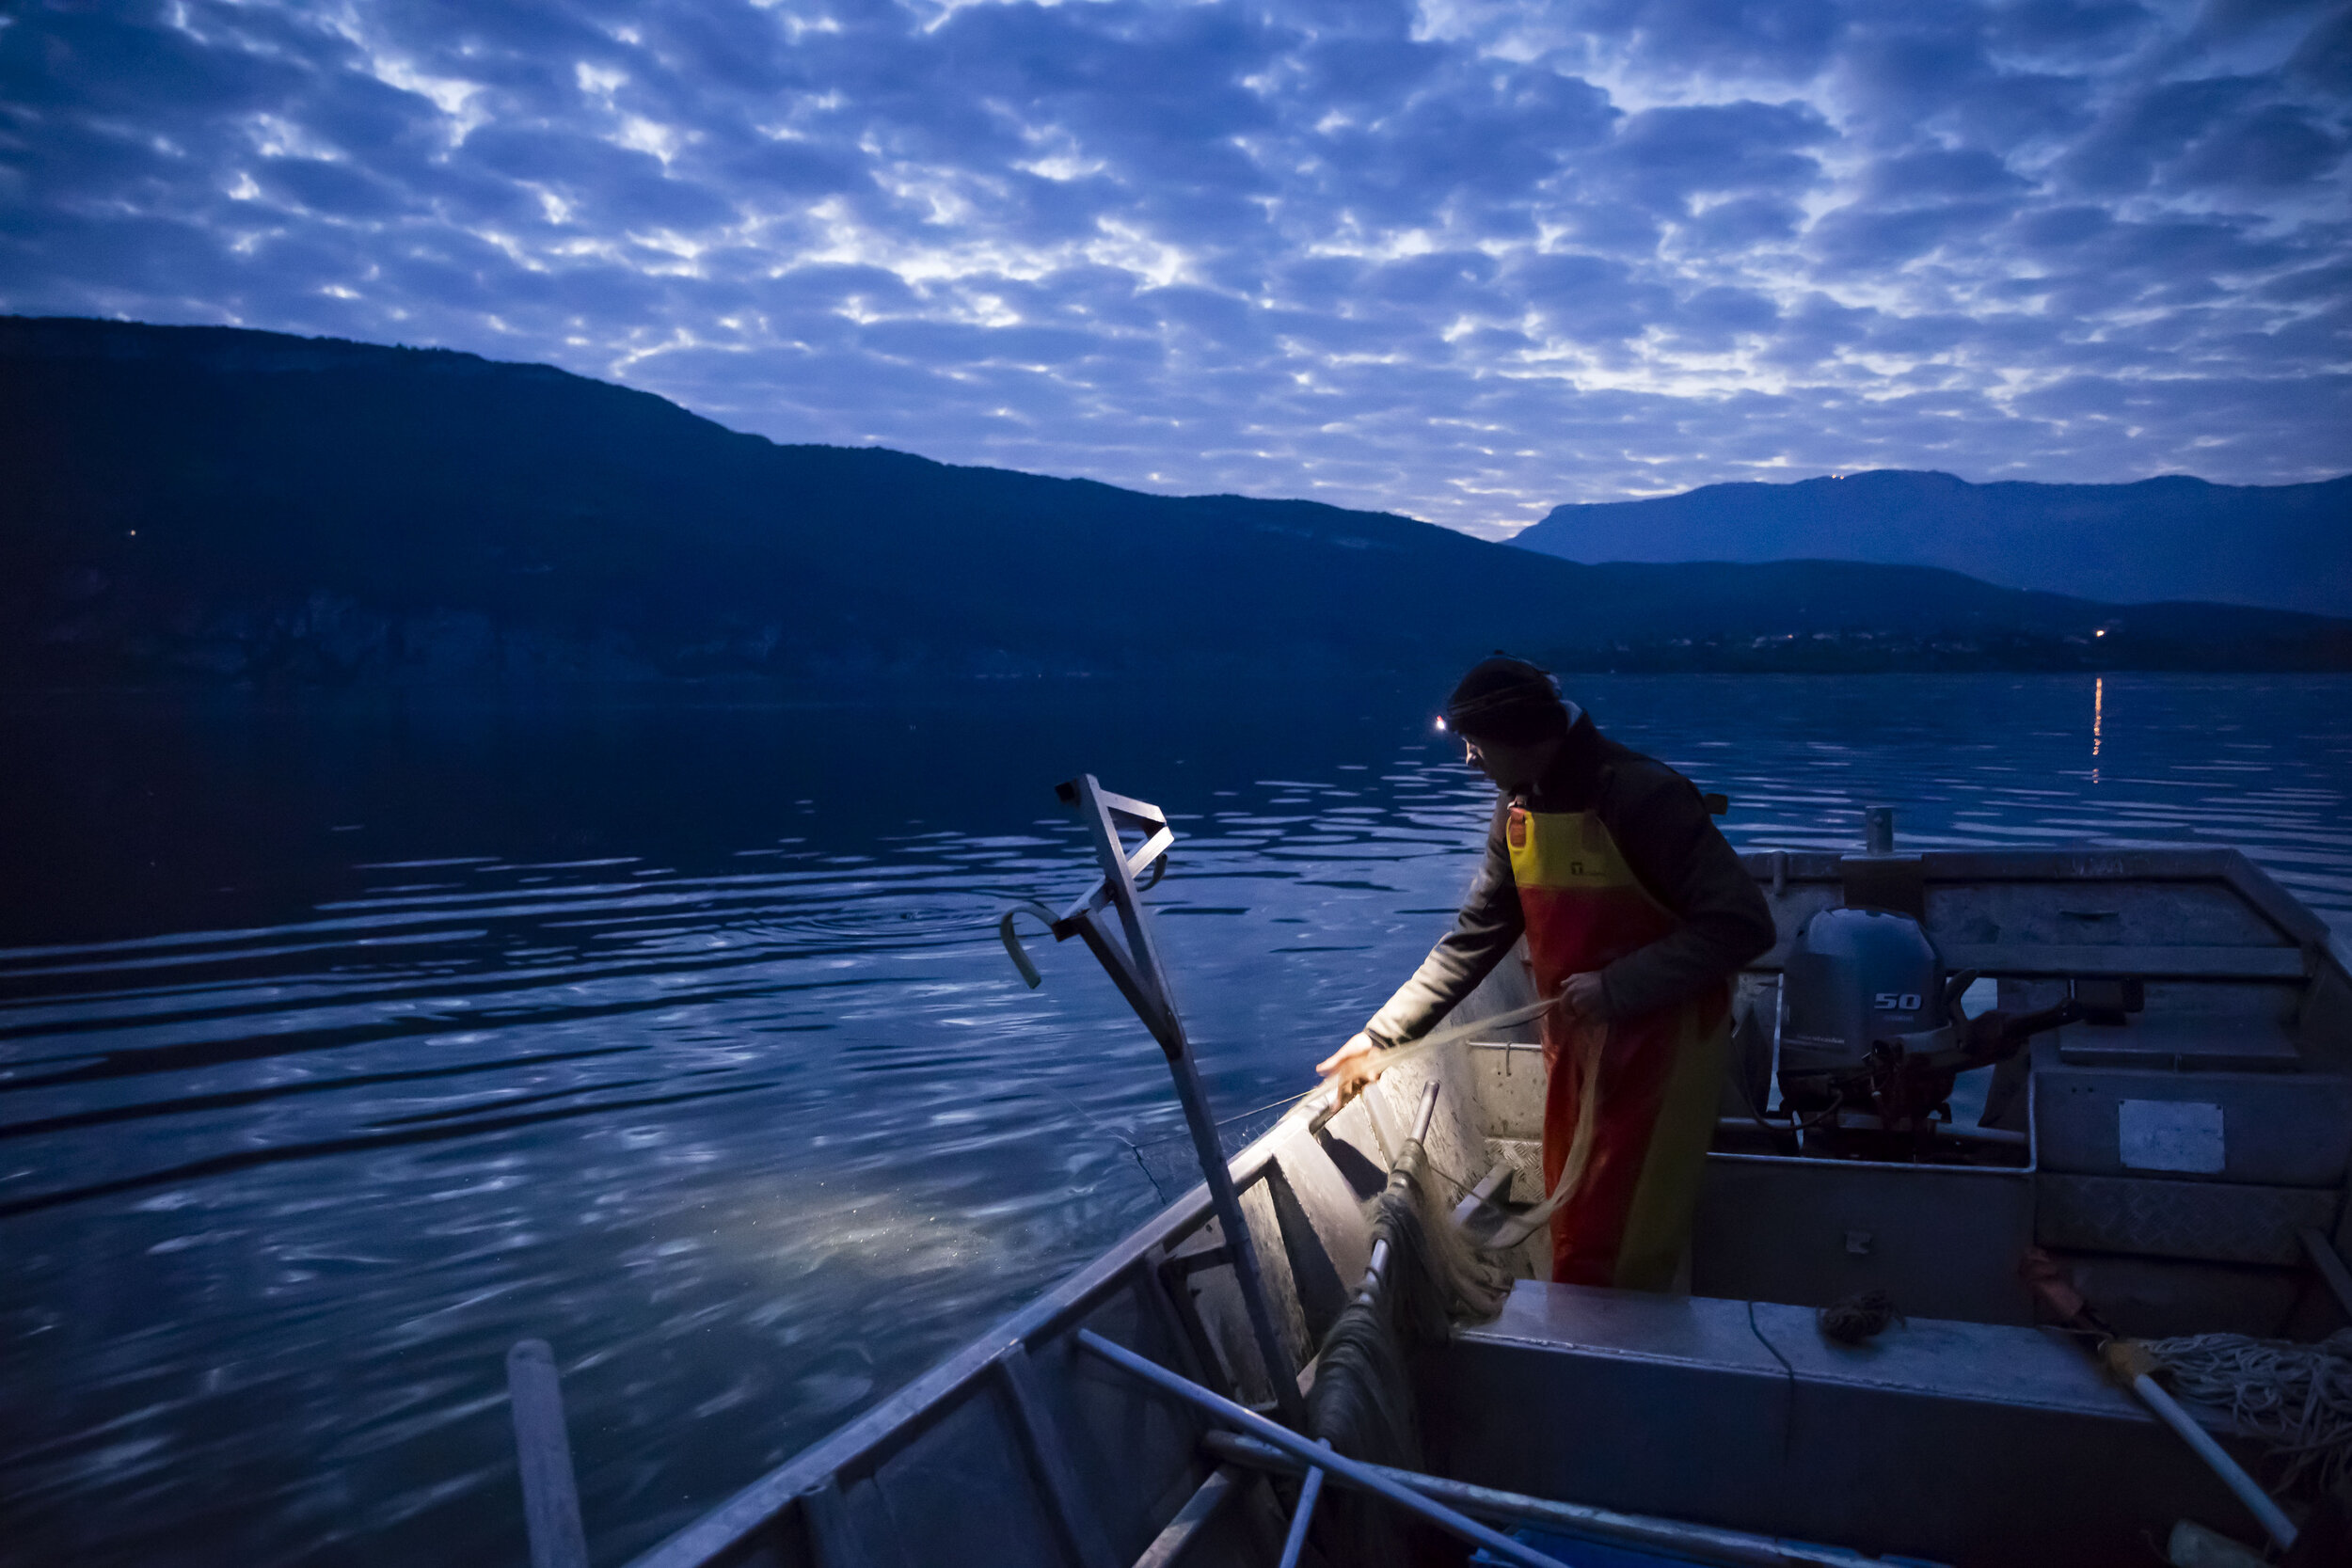   ©Vincent Isoré / IP3 ; Brison-Saint-Innocent, France April 25, 2020 - Professional fisherman Mickael Ranson continues to work during the confinement period, he raises his nets in Lac Du Bourget in the early morning.  